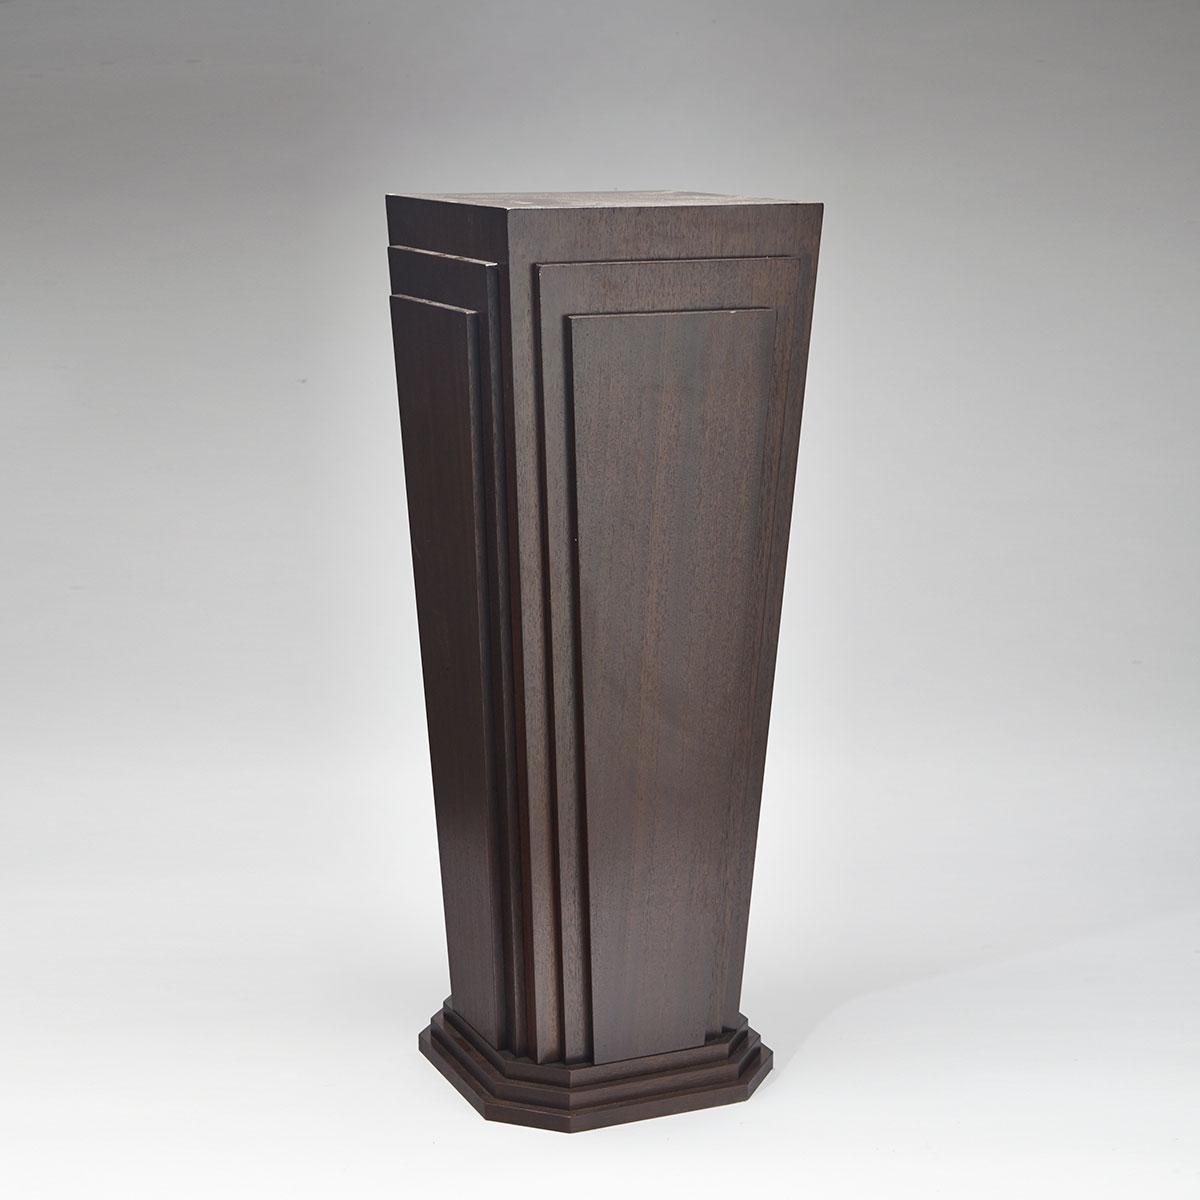 Art Deco Style Mahogany Pedestal Stand, late 20th century